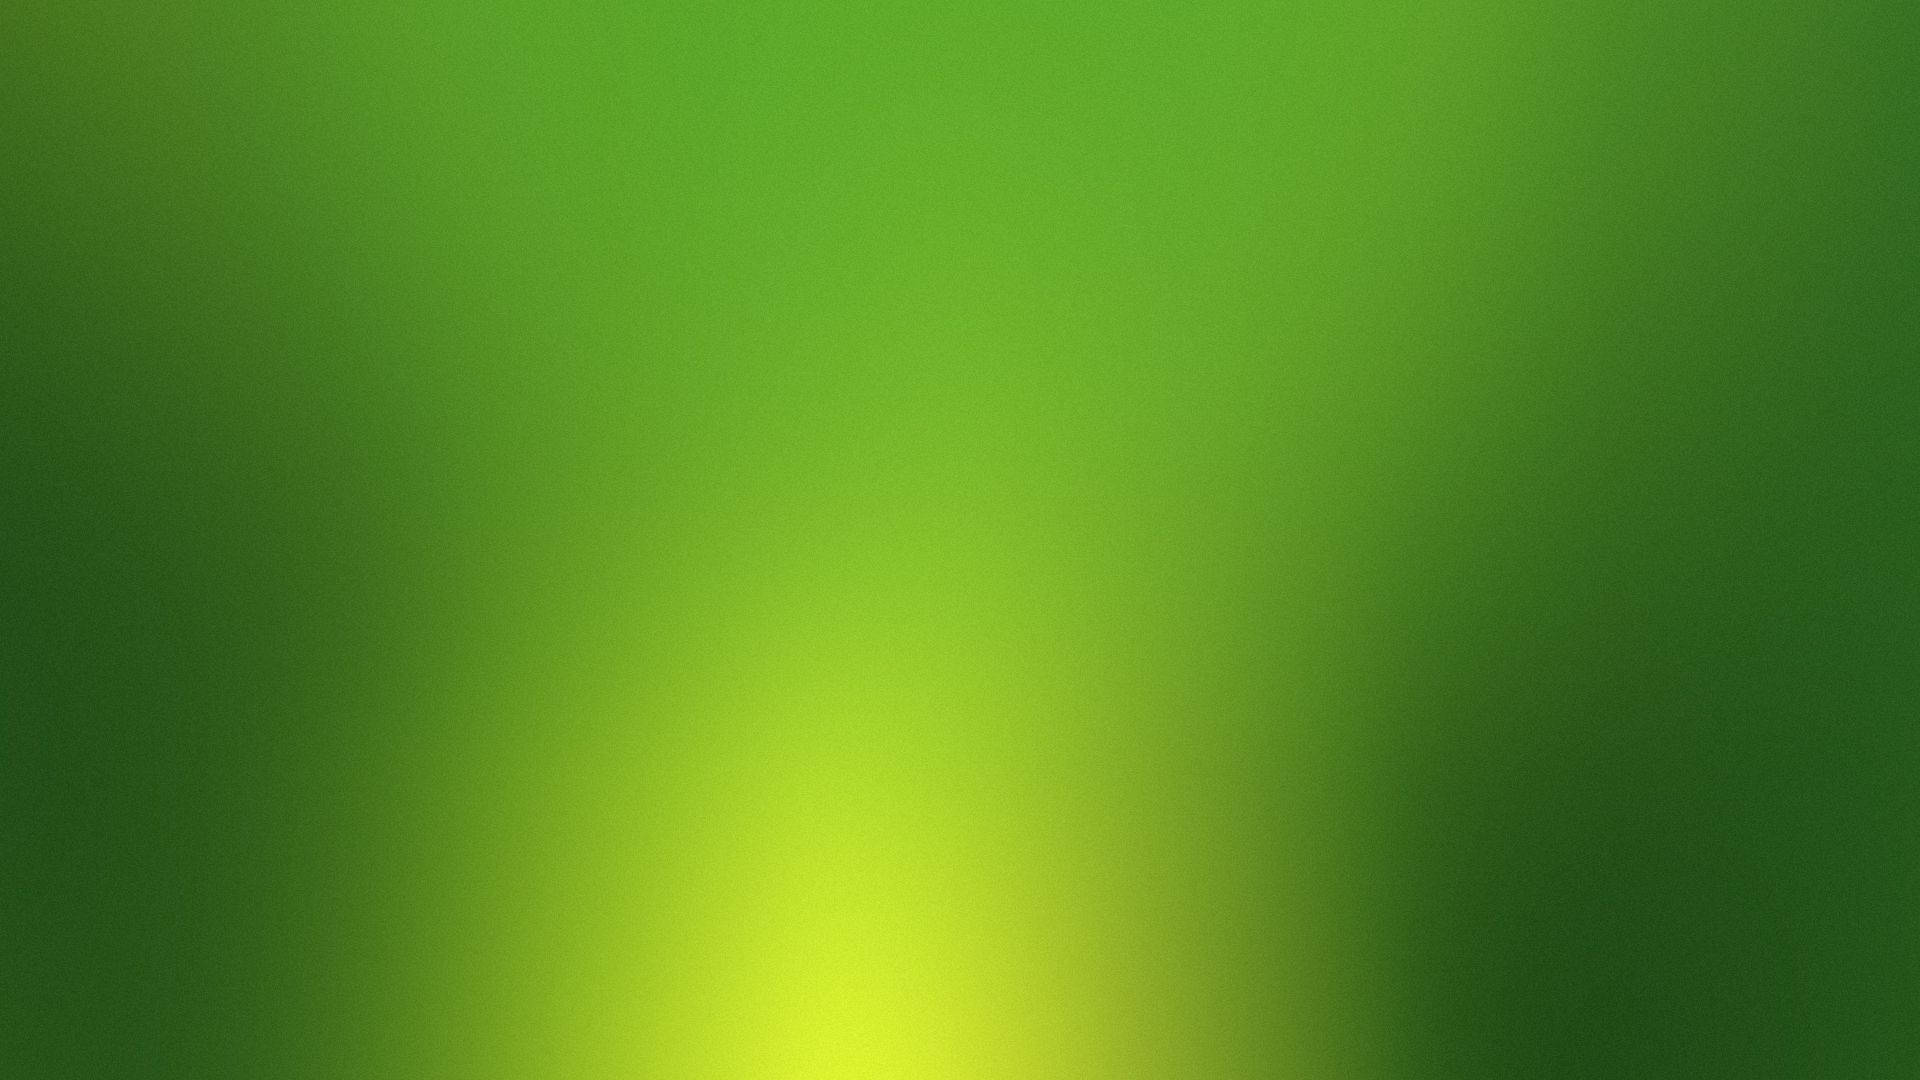 A Refreshing And Calming Plain Green Background. Background